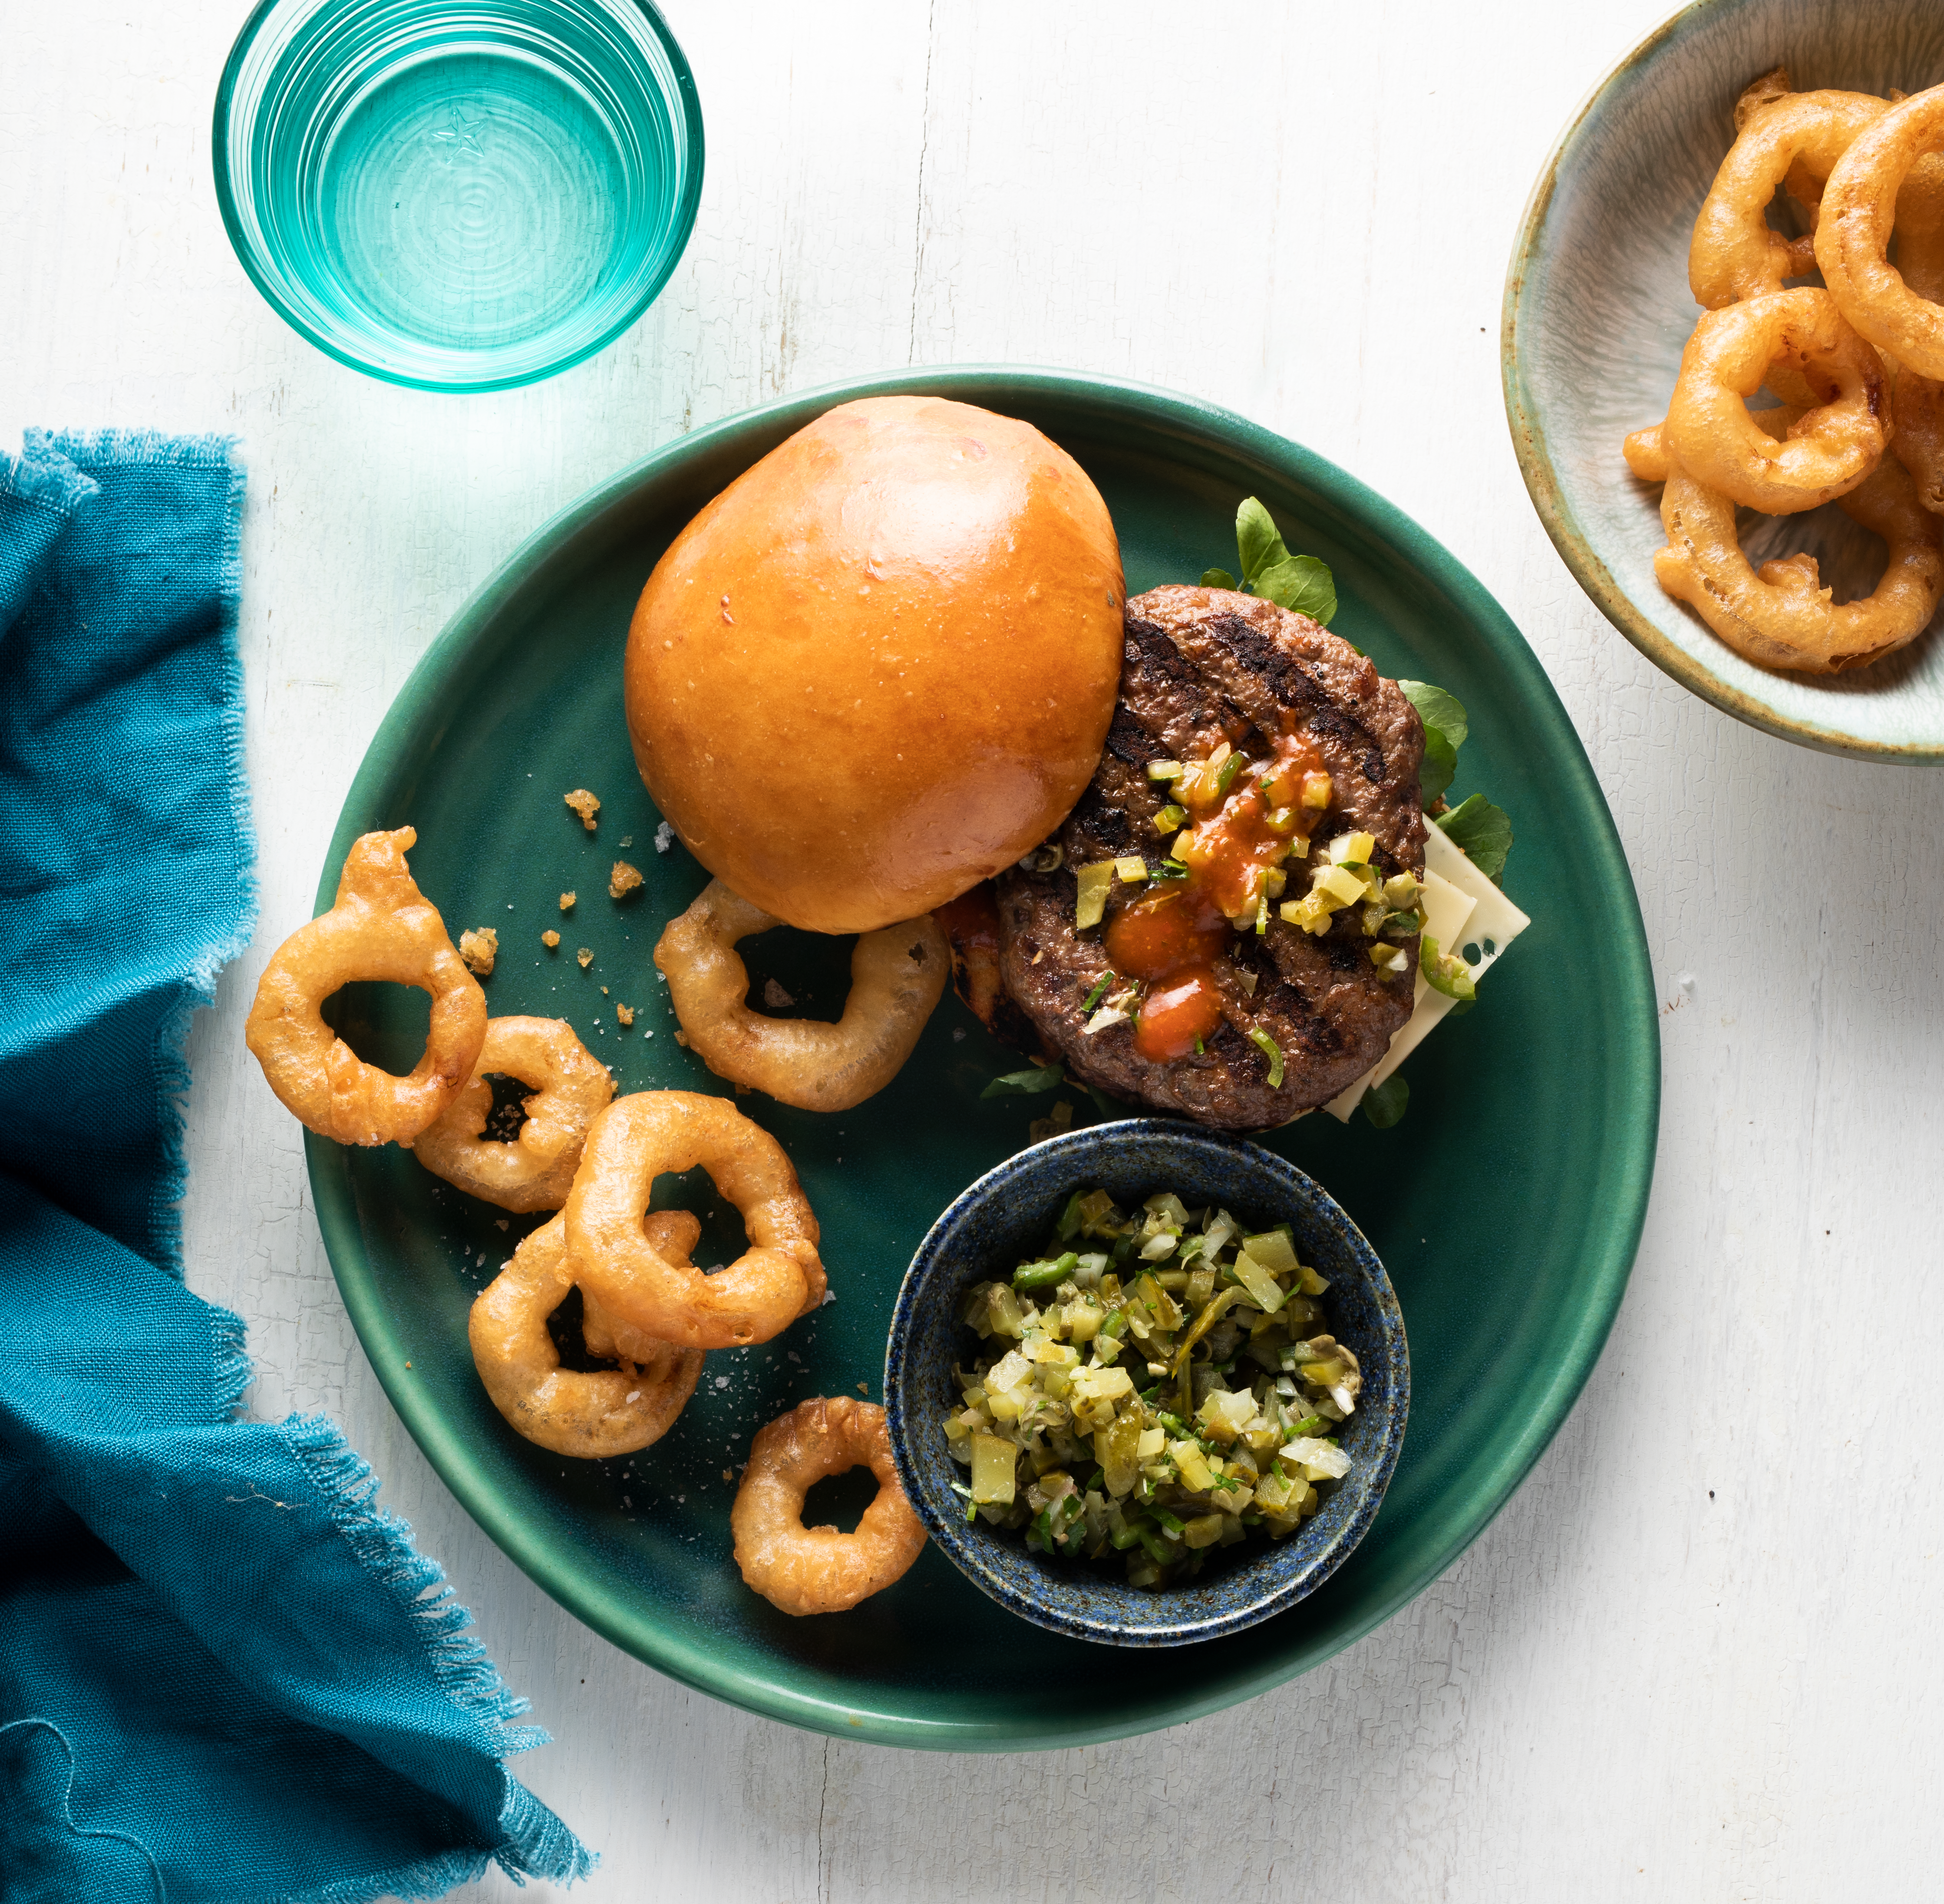 Beef and Lamb Burger with Gherkin Relish and Swiss Cheese on a green plate with fried onion rings and gherkin relish on the side